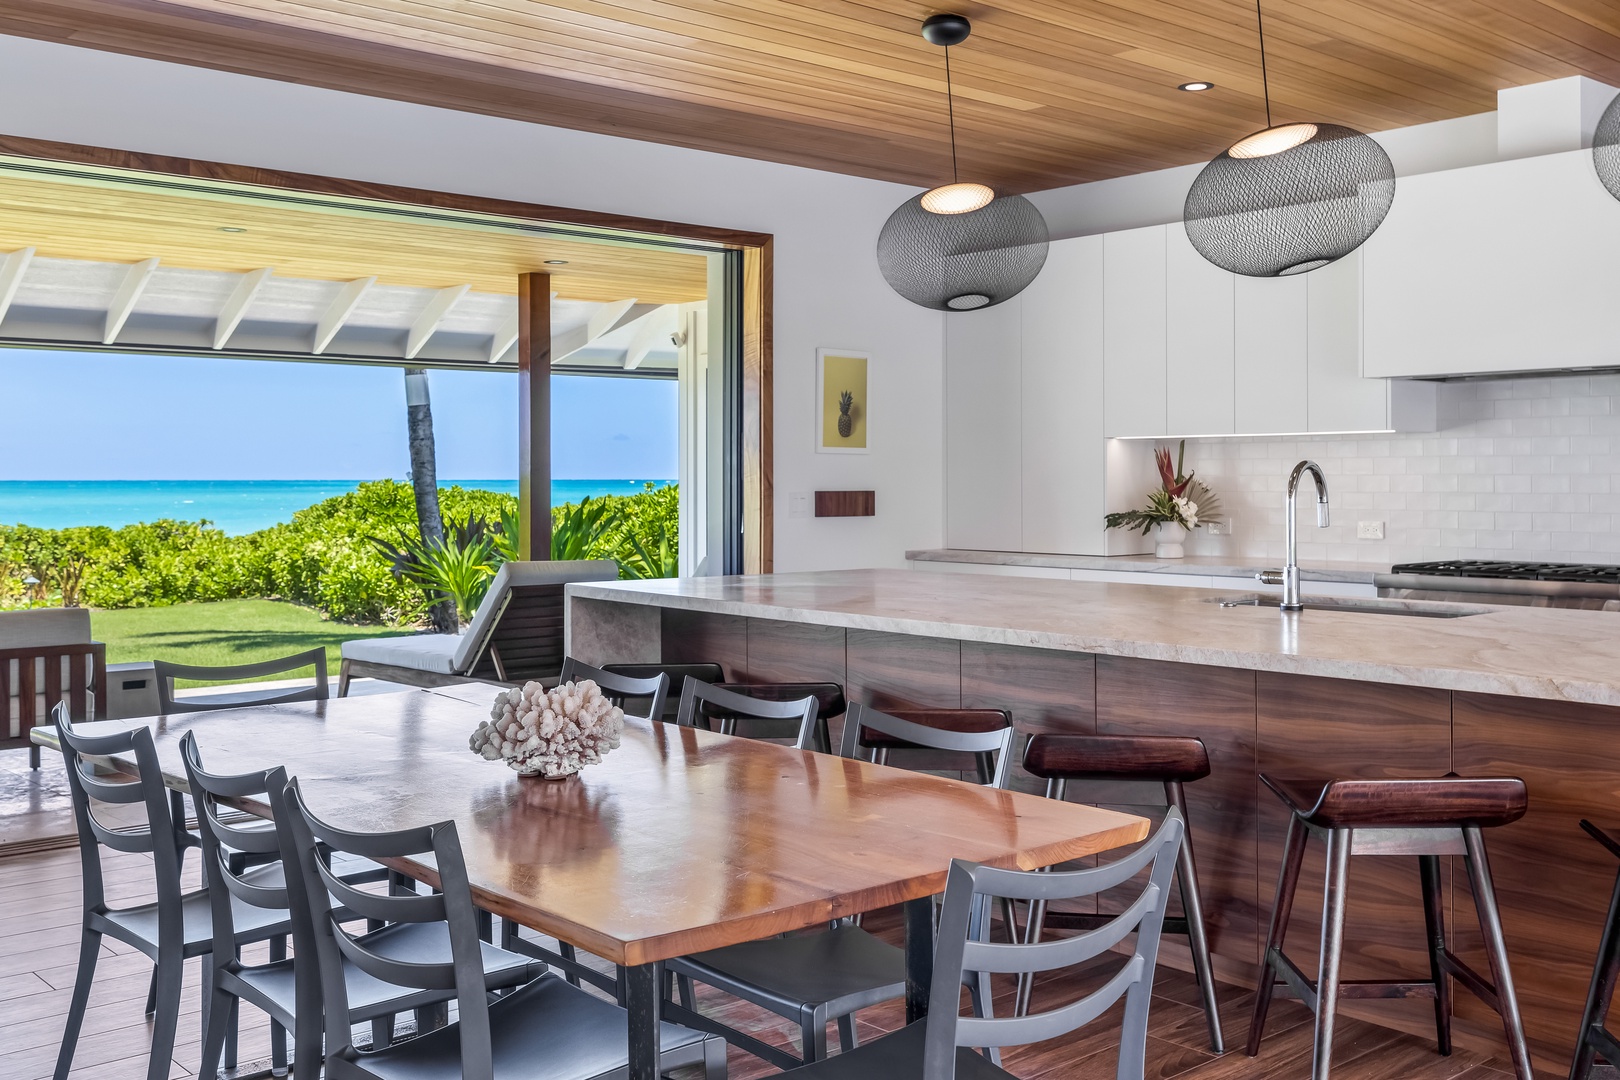 Kailua Vacation Rentals, Kailua Beach Villa - Step inside to an expansive open floor plan leading directly to the inviting pool area.